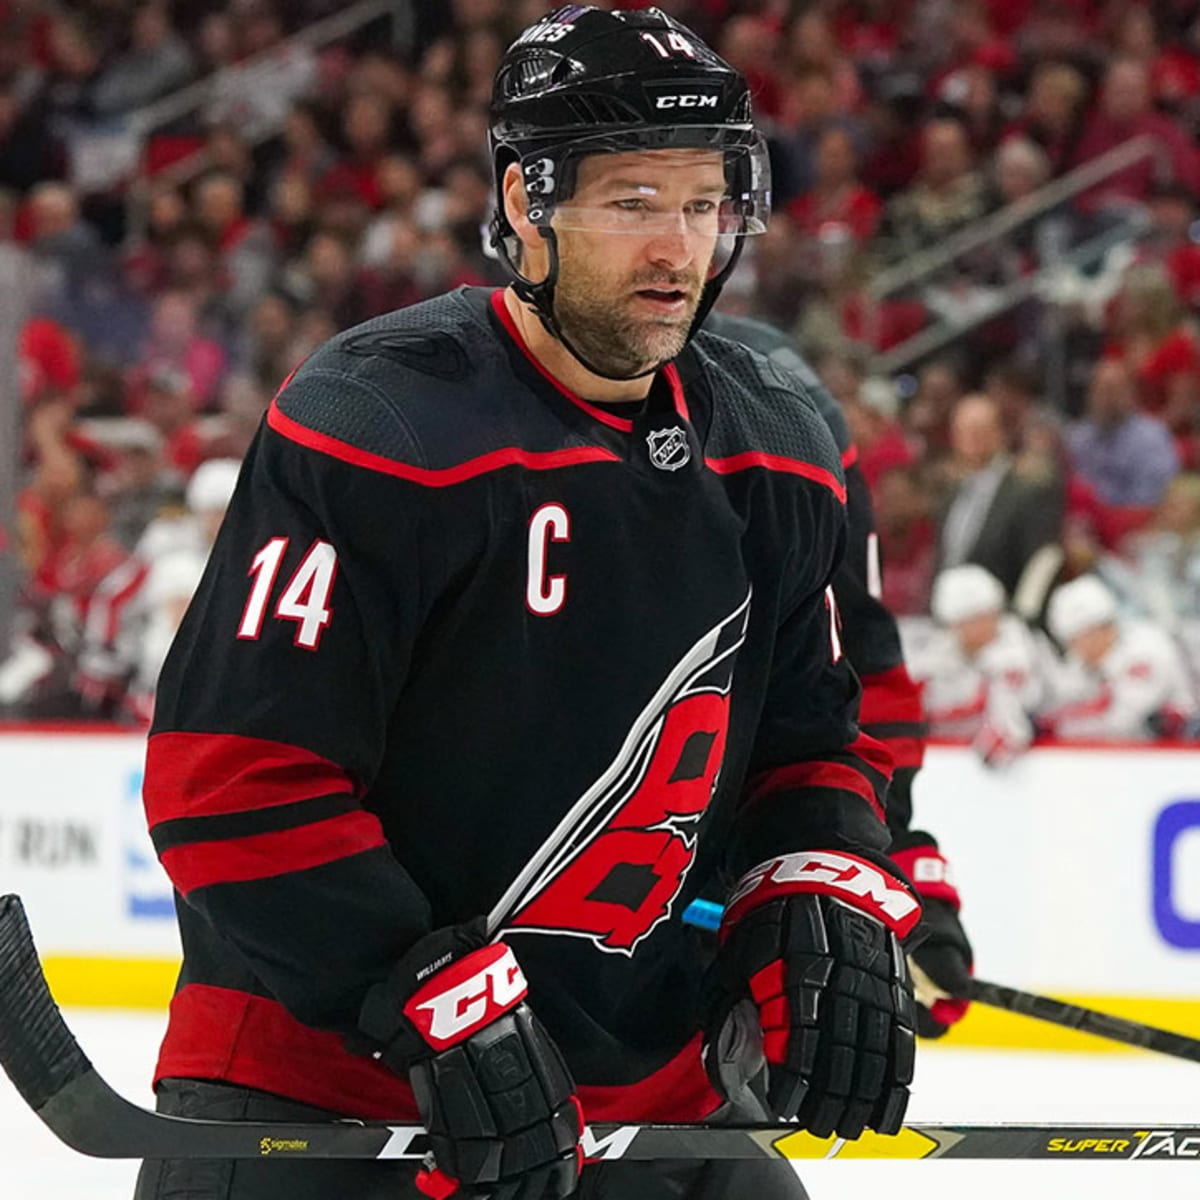 Carolina Hurricanes fans can get a free 'C' on their jerseys courtesy of  Justin Williams